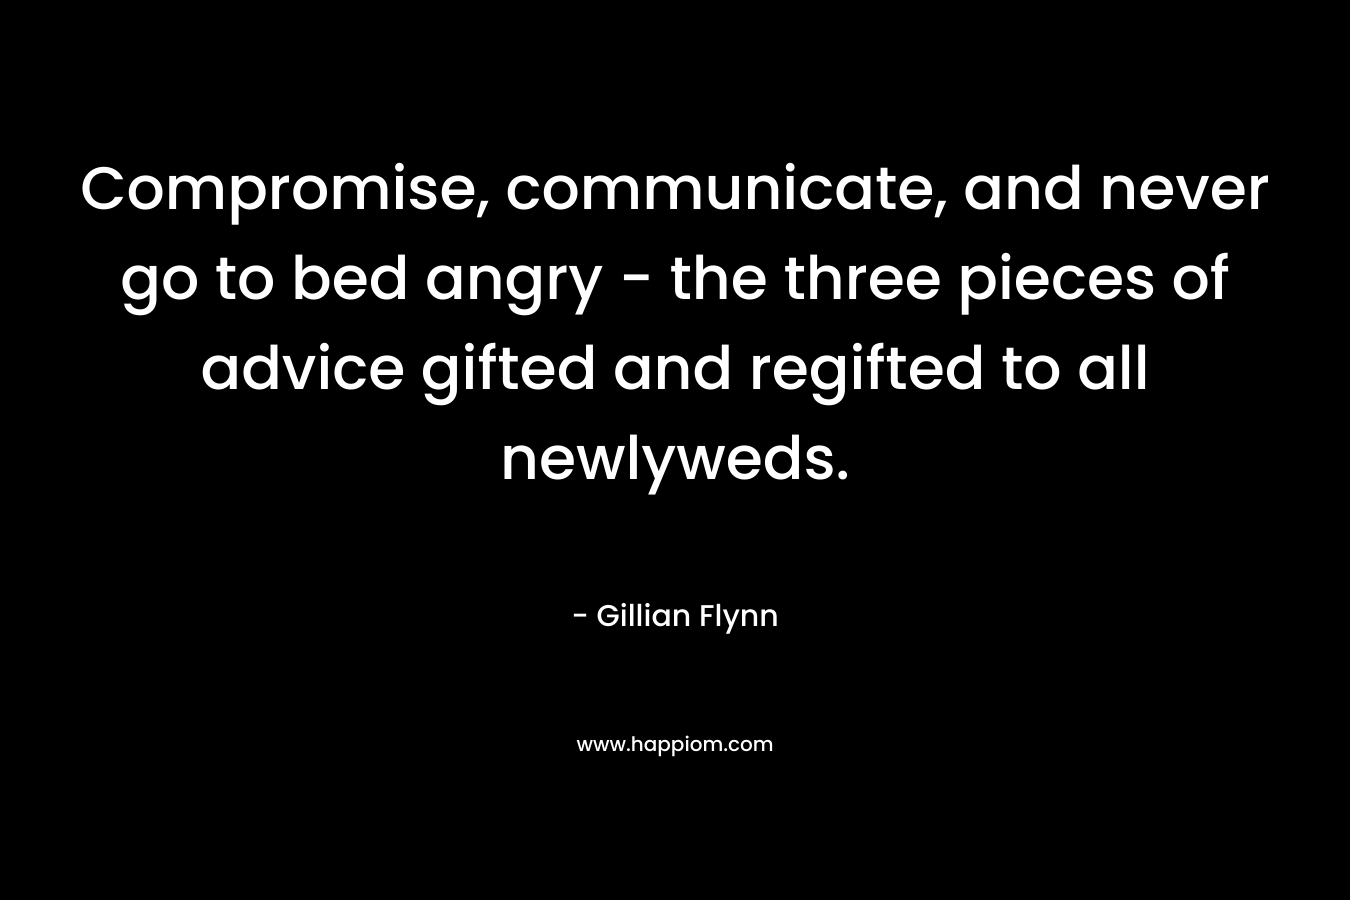 Compromise, communicate, and never go to bed angry - the three pieces of advice gifted and regifted to all newlyweds.